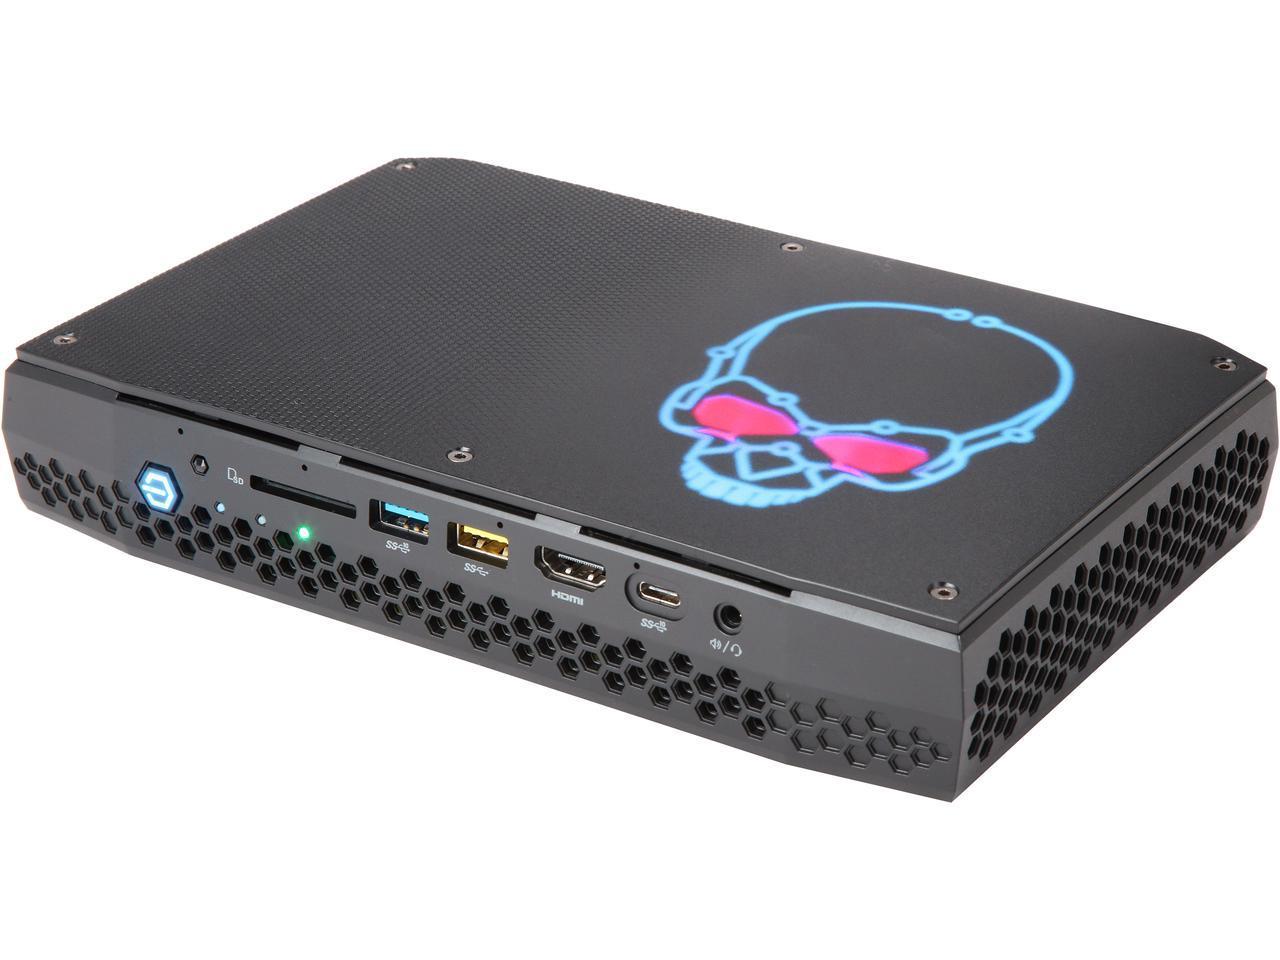 Intel NUC 8 Premium VR Capable Mini PC VR-Ready with AMD Radeon for high-end gaming